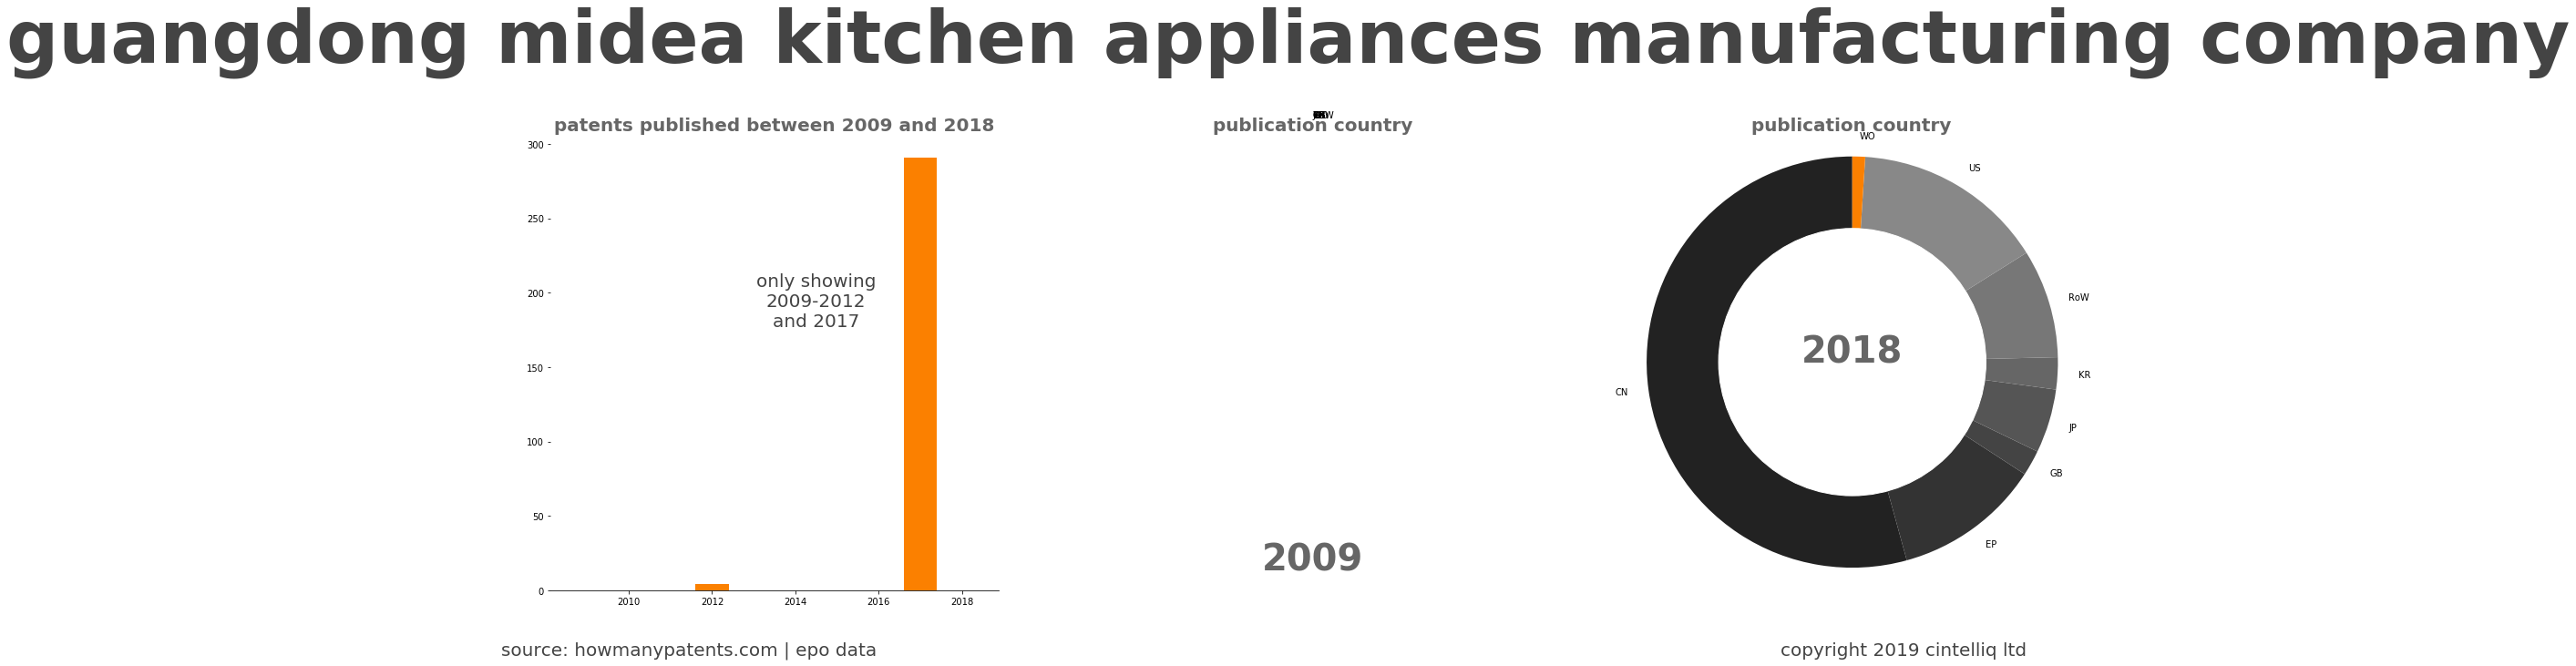 summary of patents for Guangdong Midea Kitchen Appliances Manufacturing Company